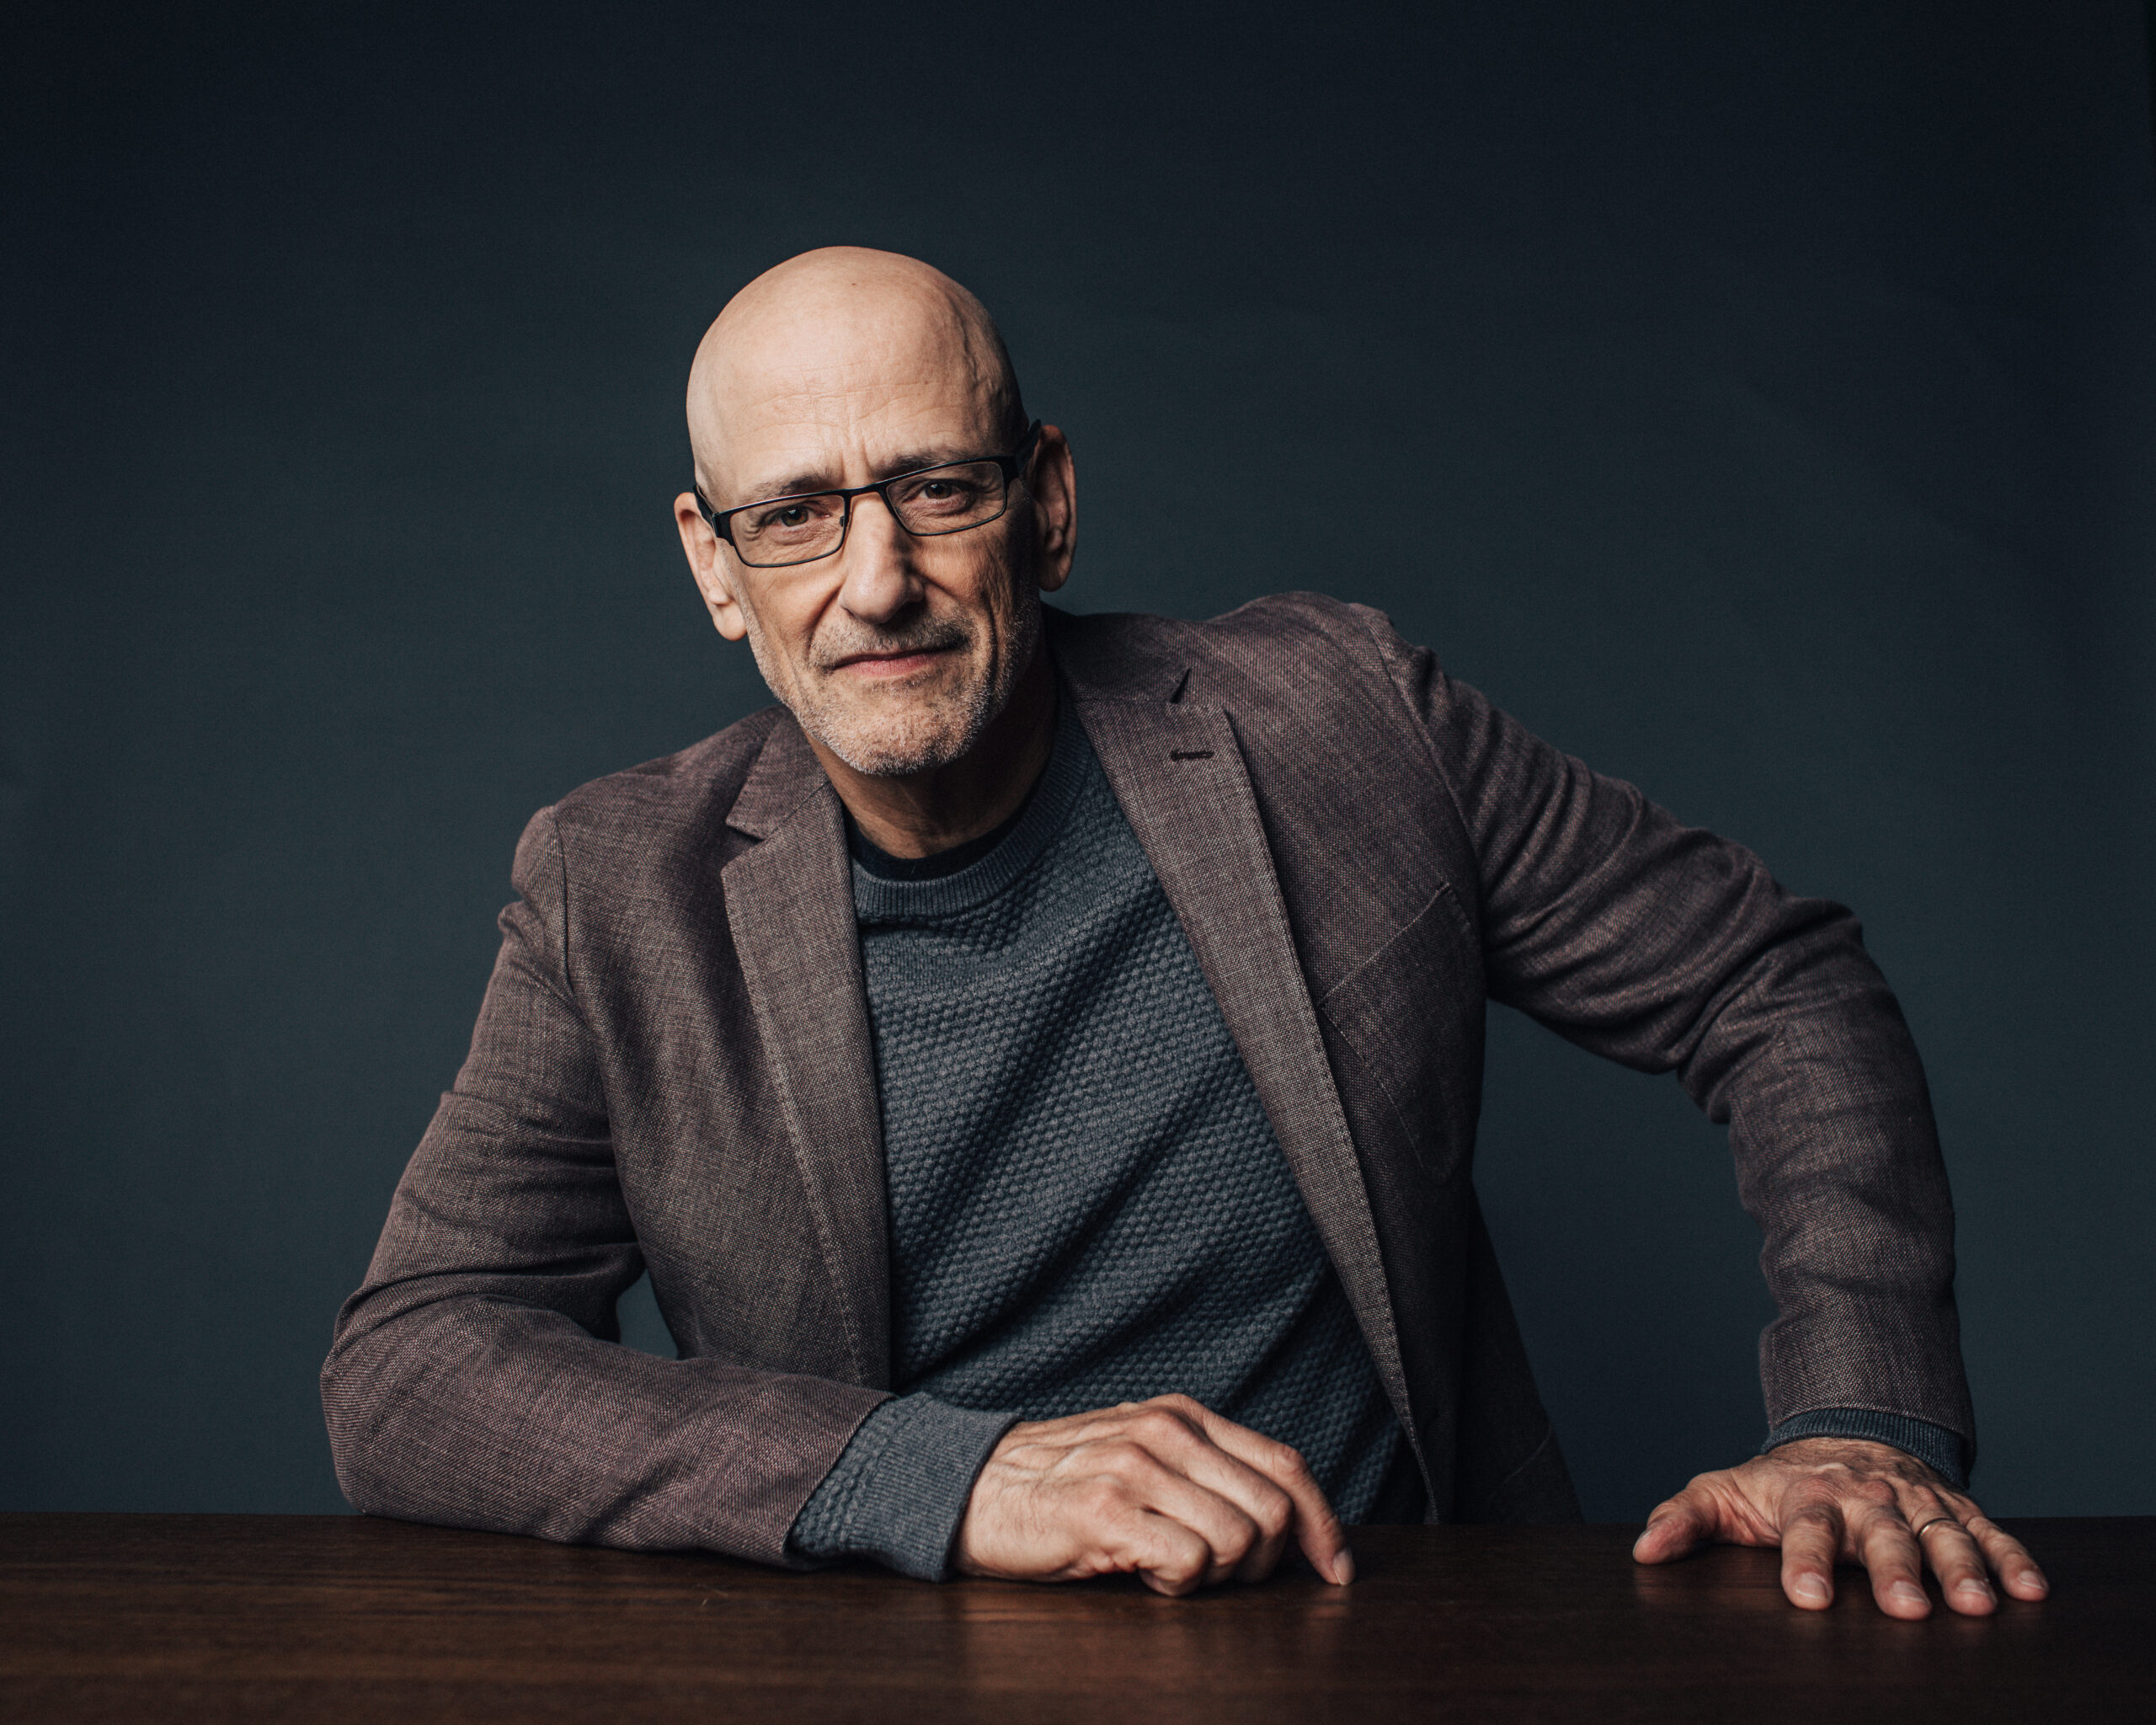 Andrew Klavan’s detective series is back with a new installment: ‘The House of Love and Death’.